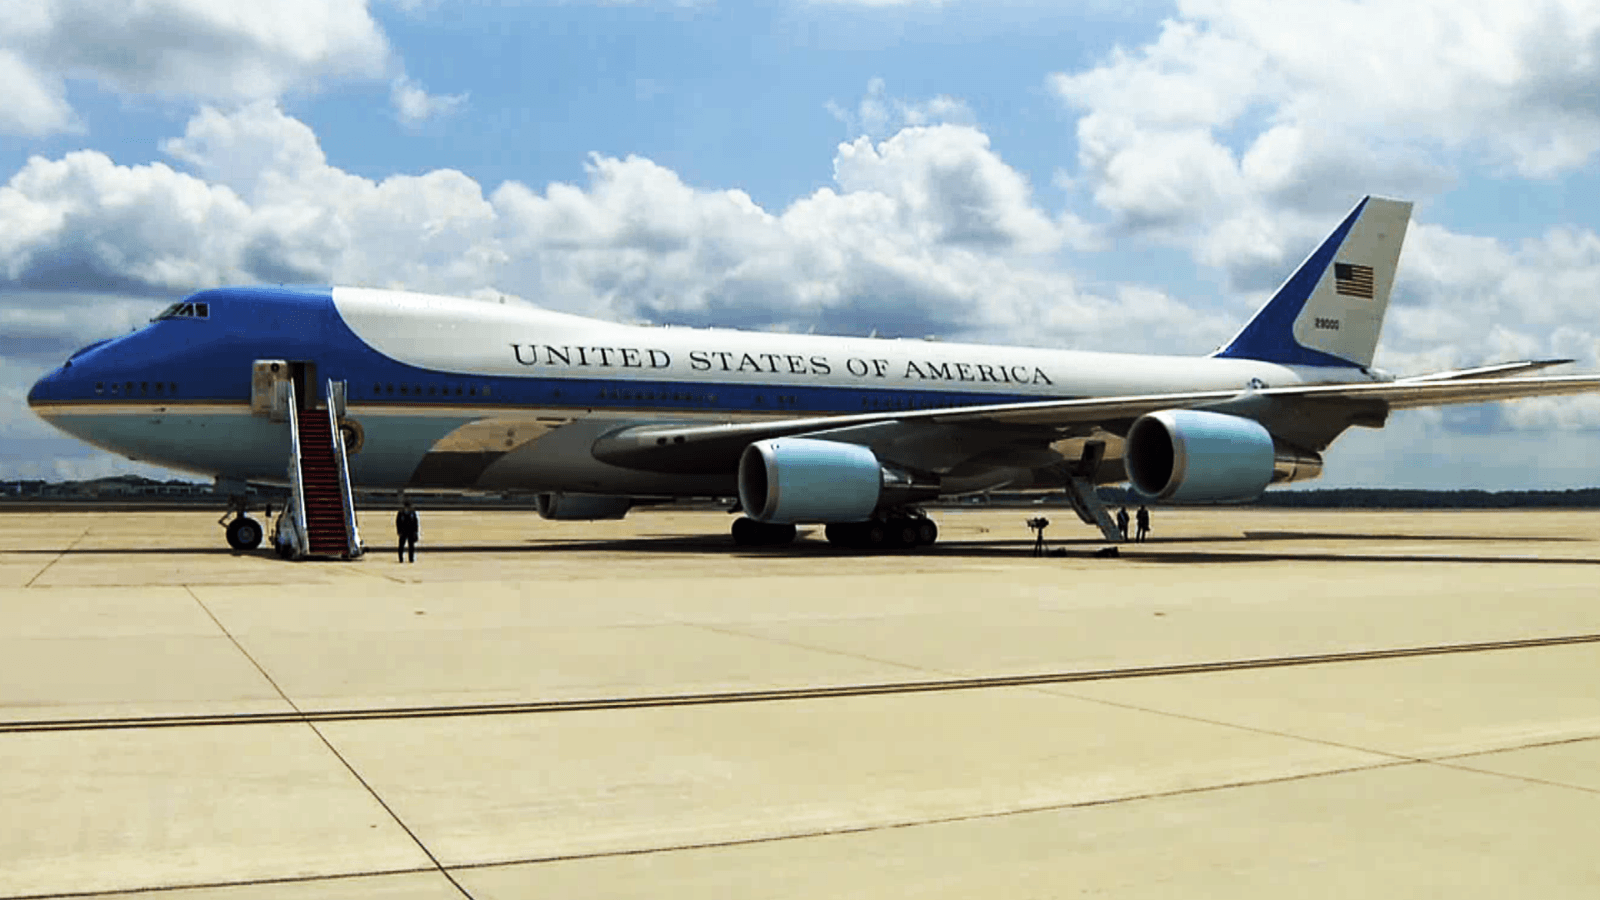 The new Air Force One